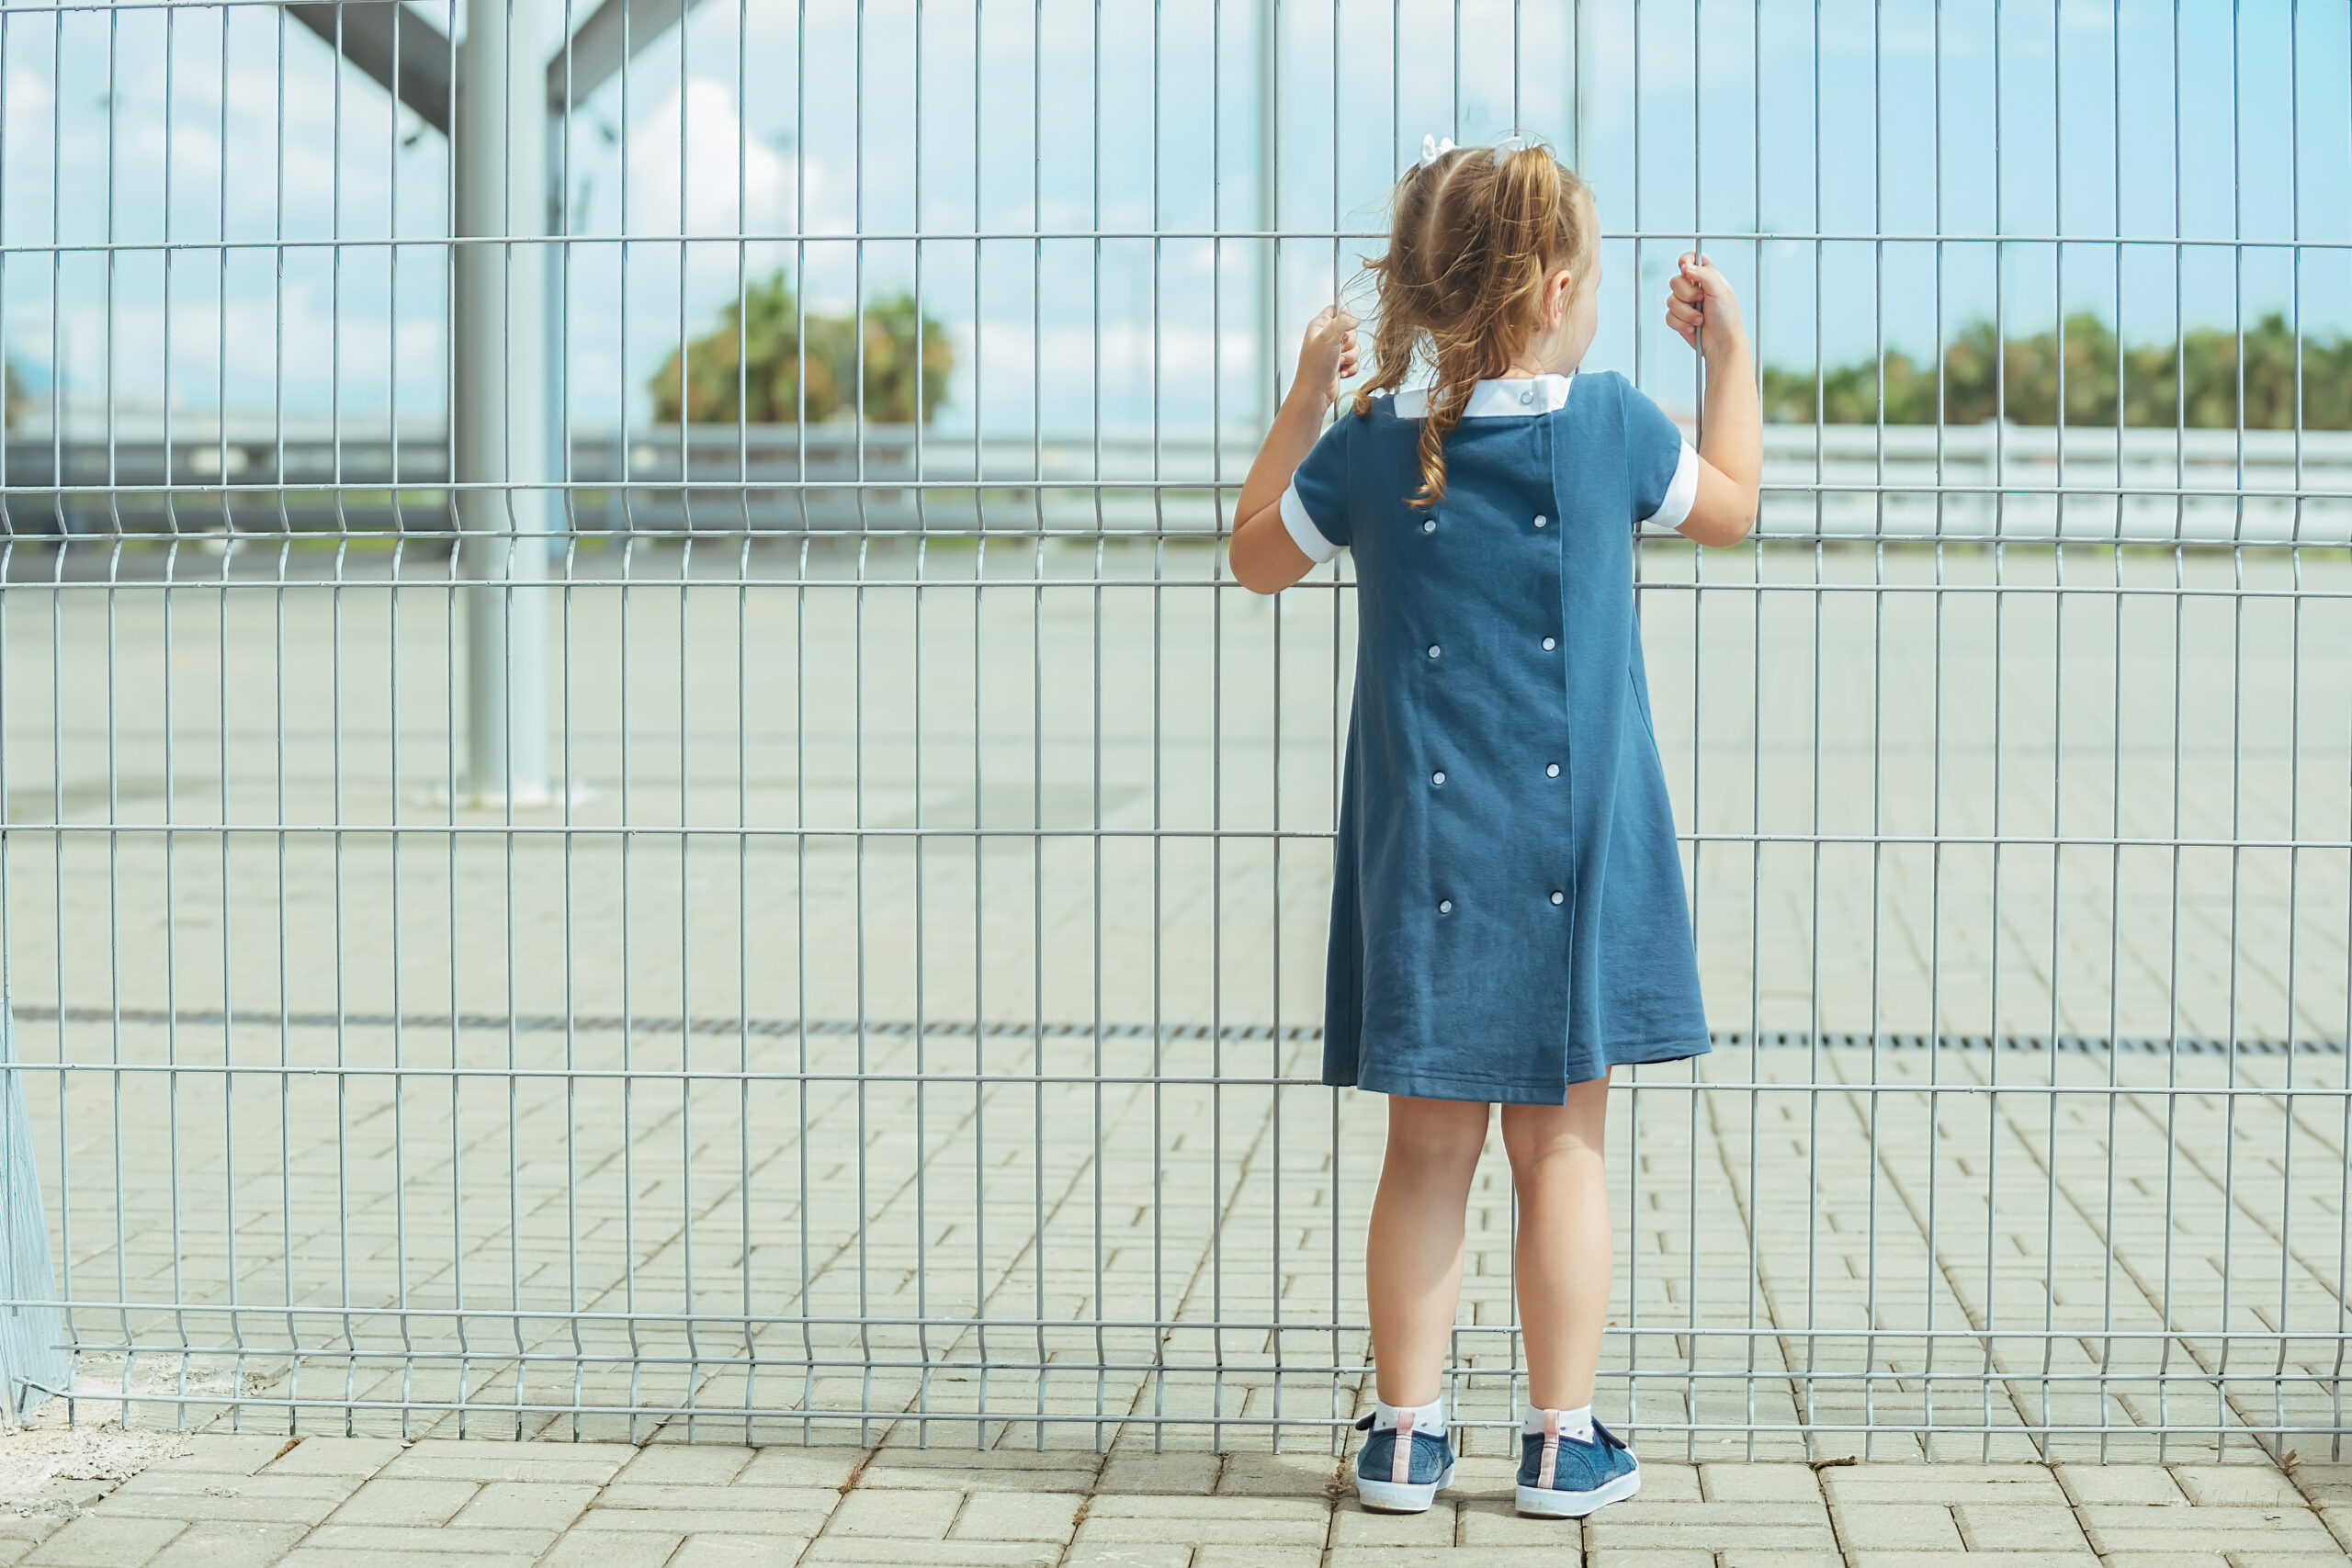 preschool-girl-in-blue-dress-stands-near-barrier-from-high-mesh-fence-and-holds-on-to-it